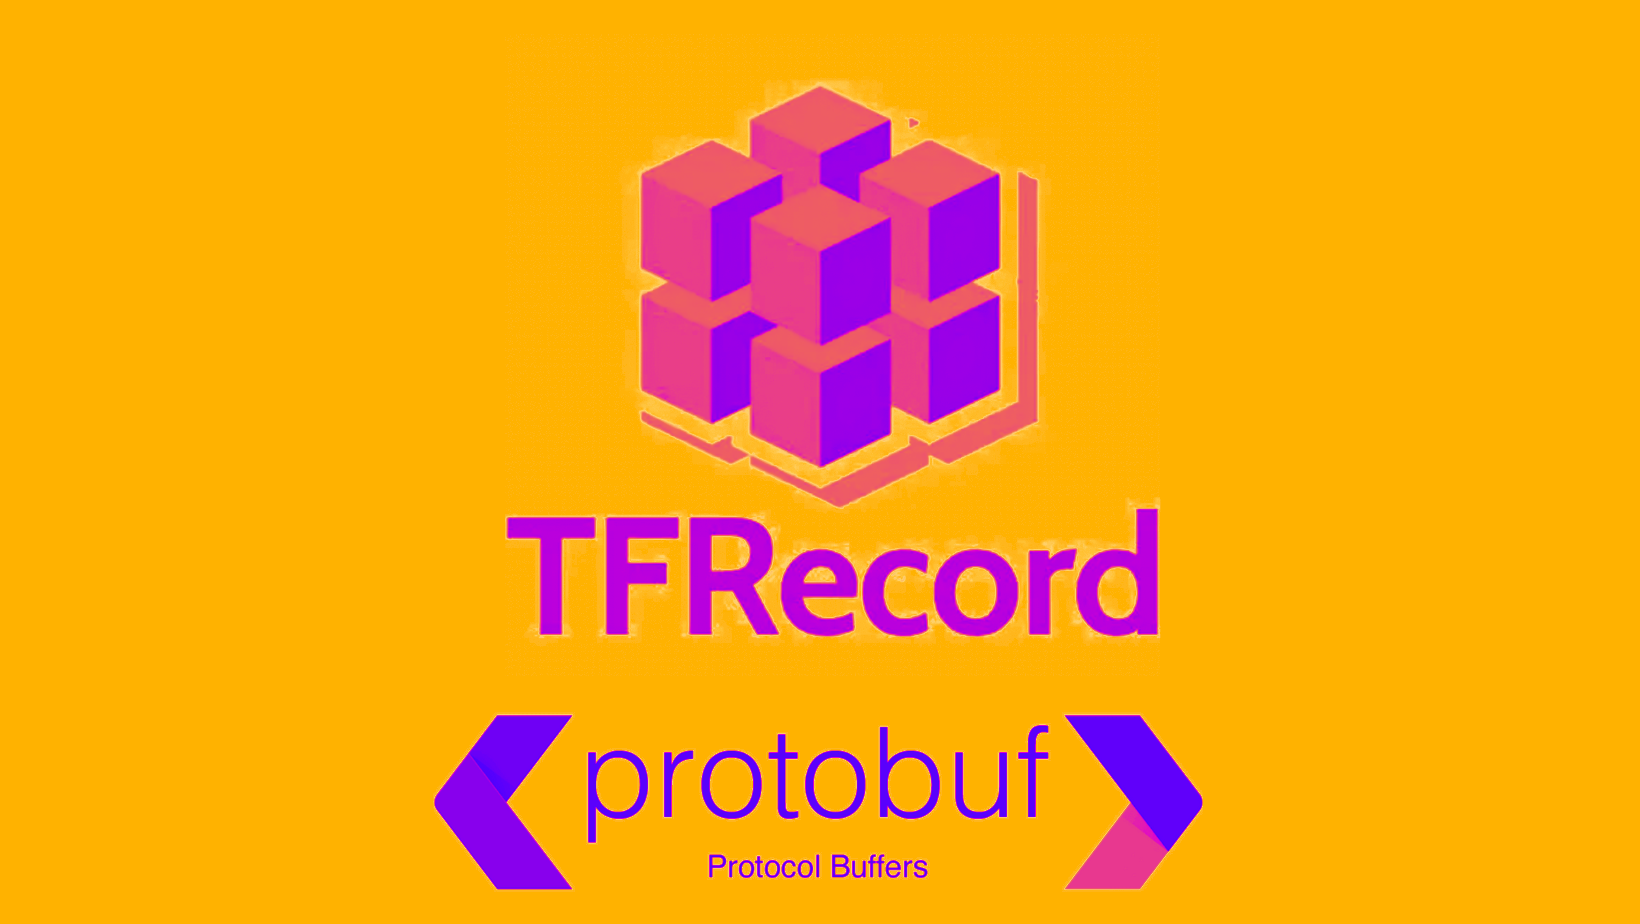 Using TFRecords and Protobufs to optimize deep learning (computer vision) pipelines and track our results in Comet ML